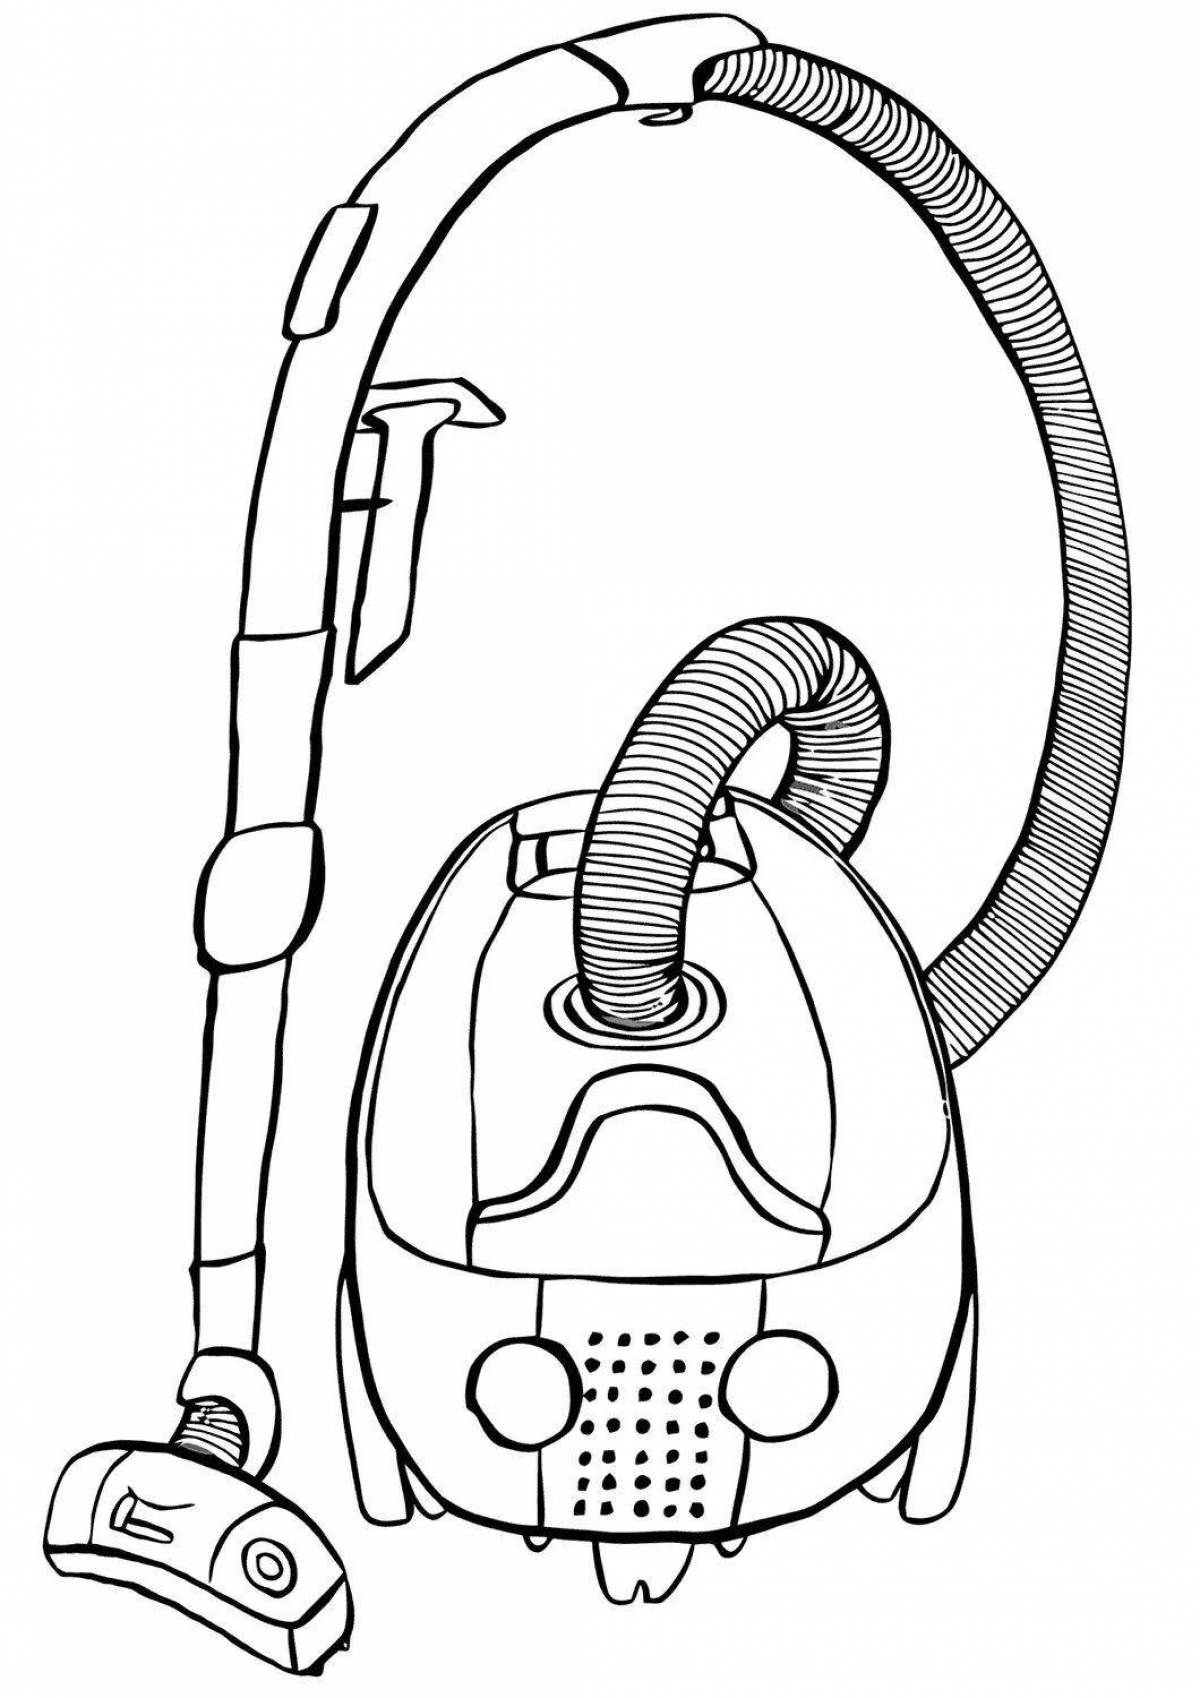 Bold appliances coloring page